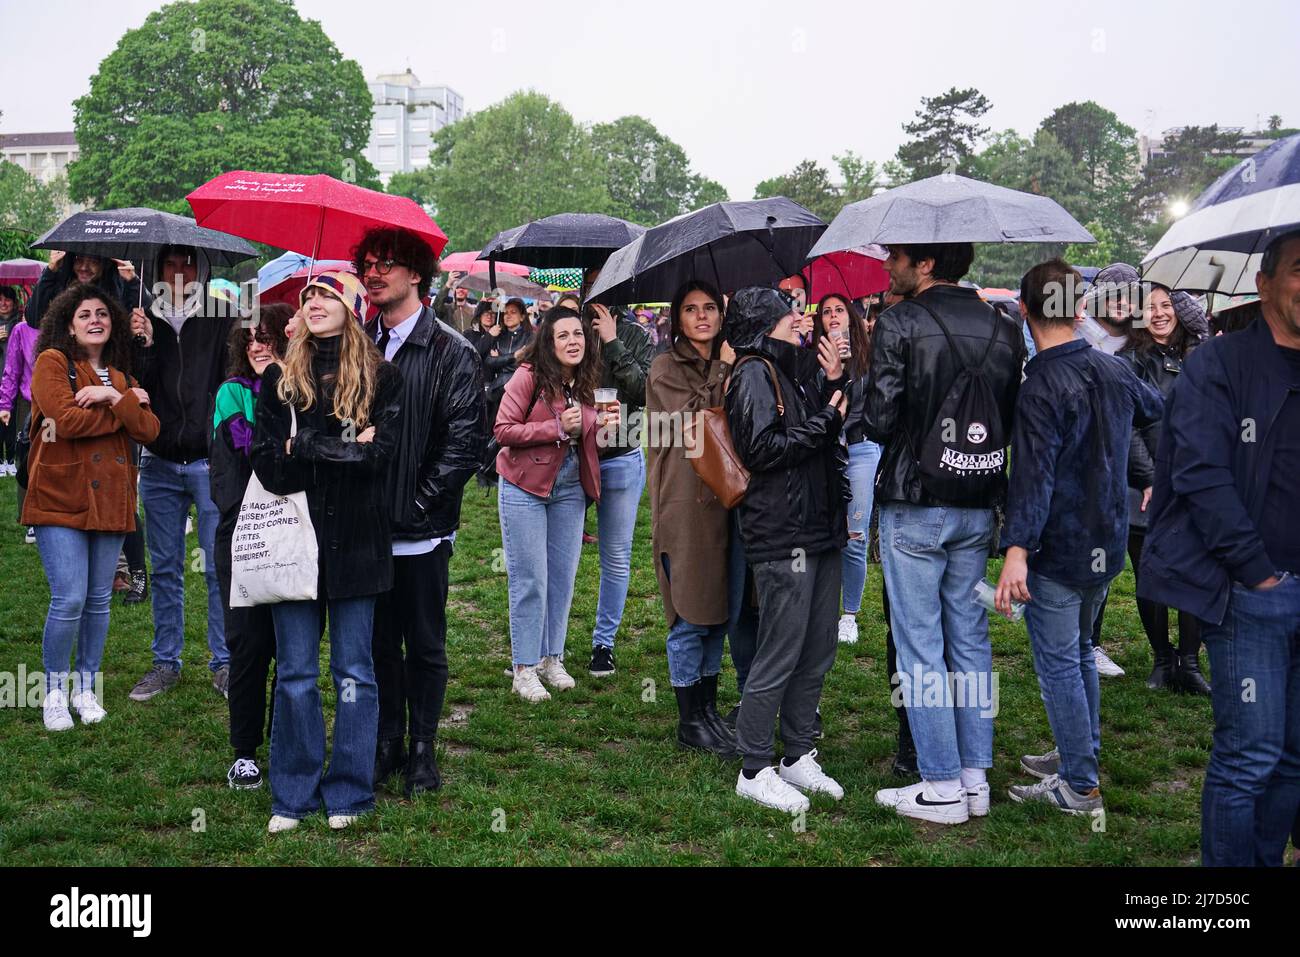 People at an outdoor event take cover from the rain with umbrellas. Turin, Italy - May 2022 Stock Photo